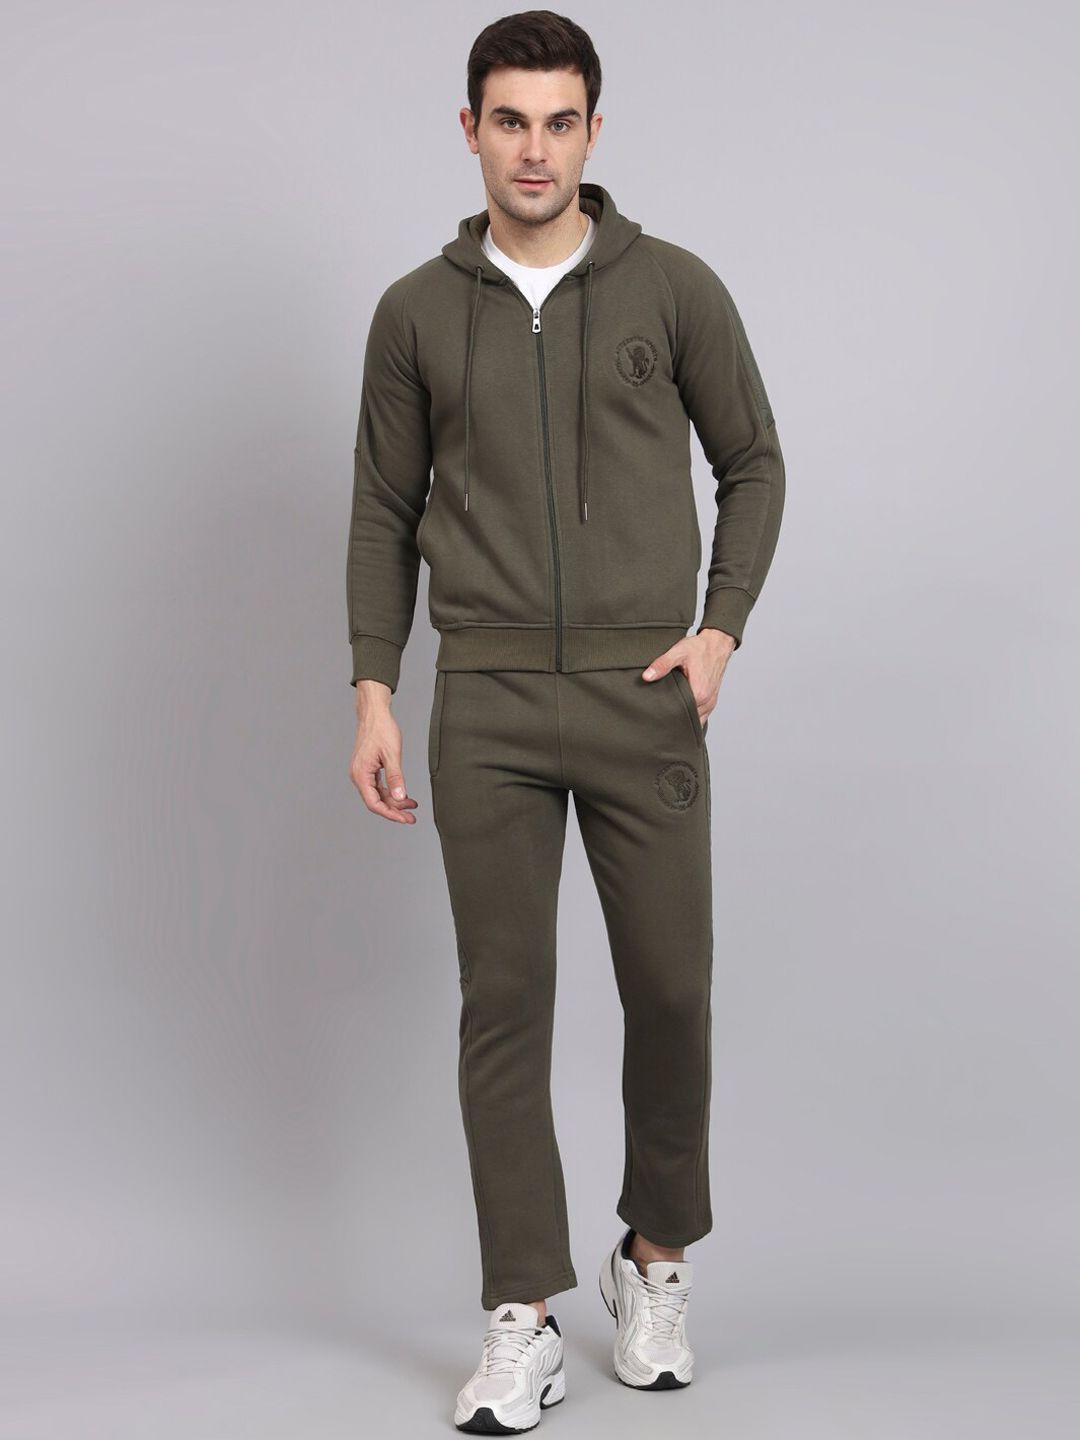 39 threads hooded mid-rise fleece tracksuits